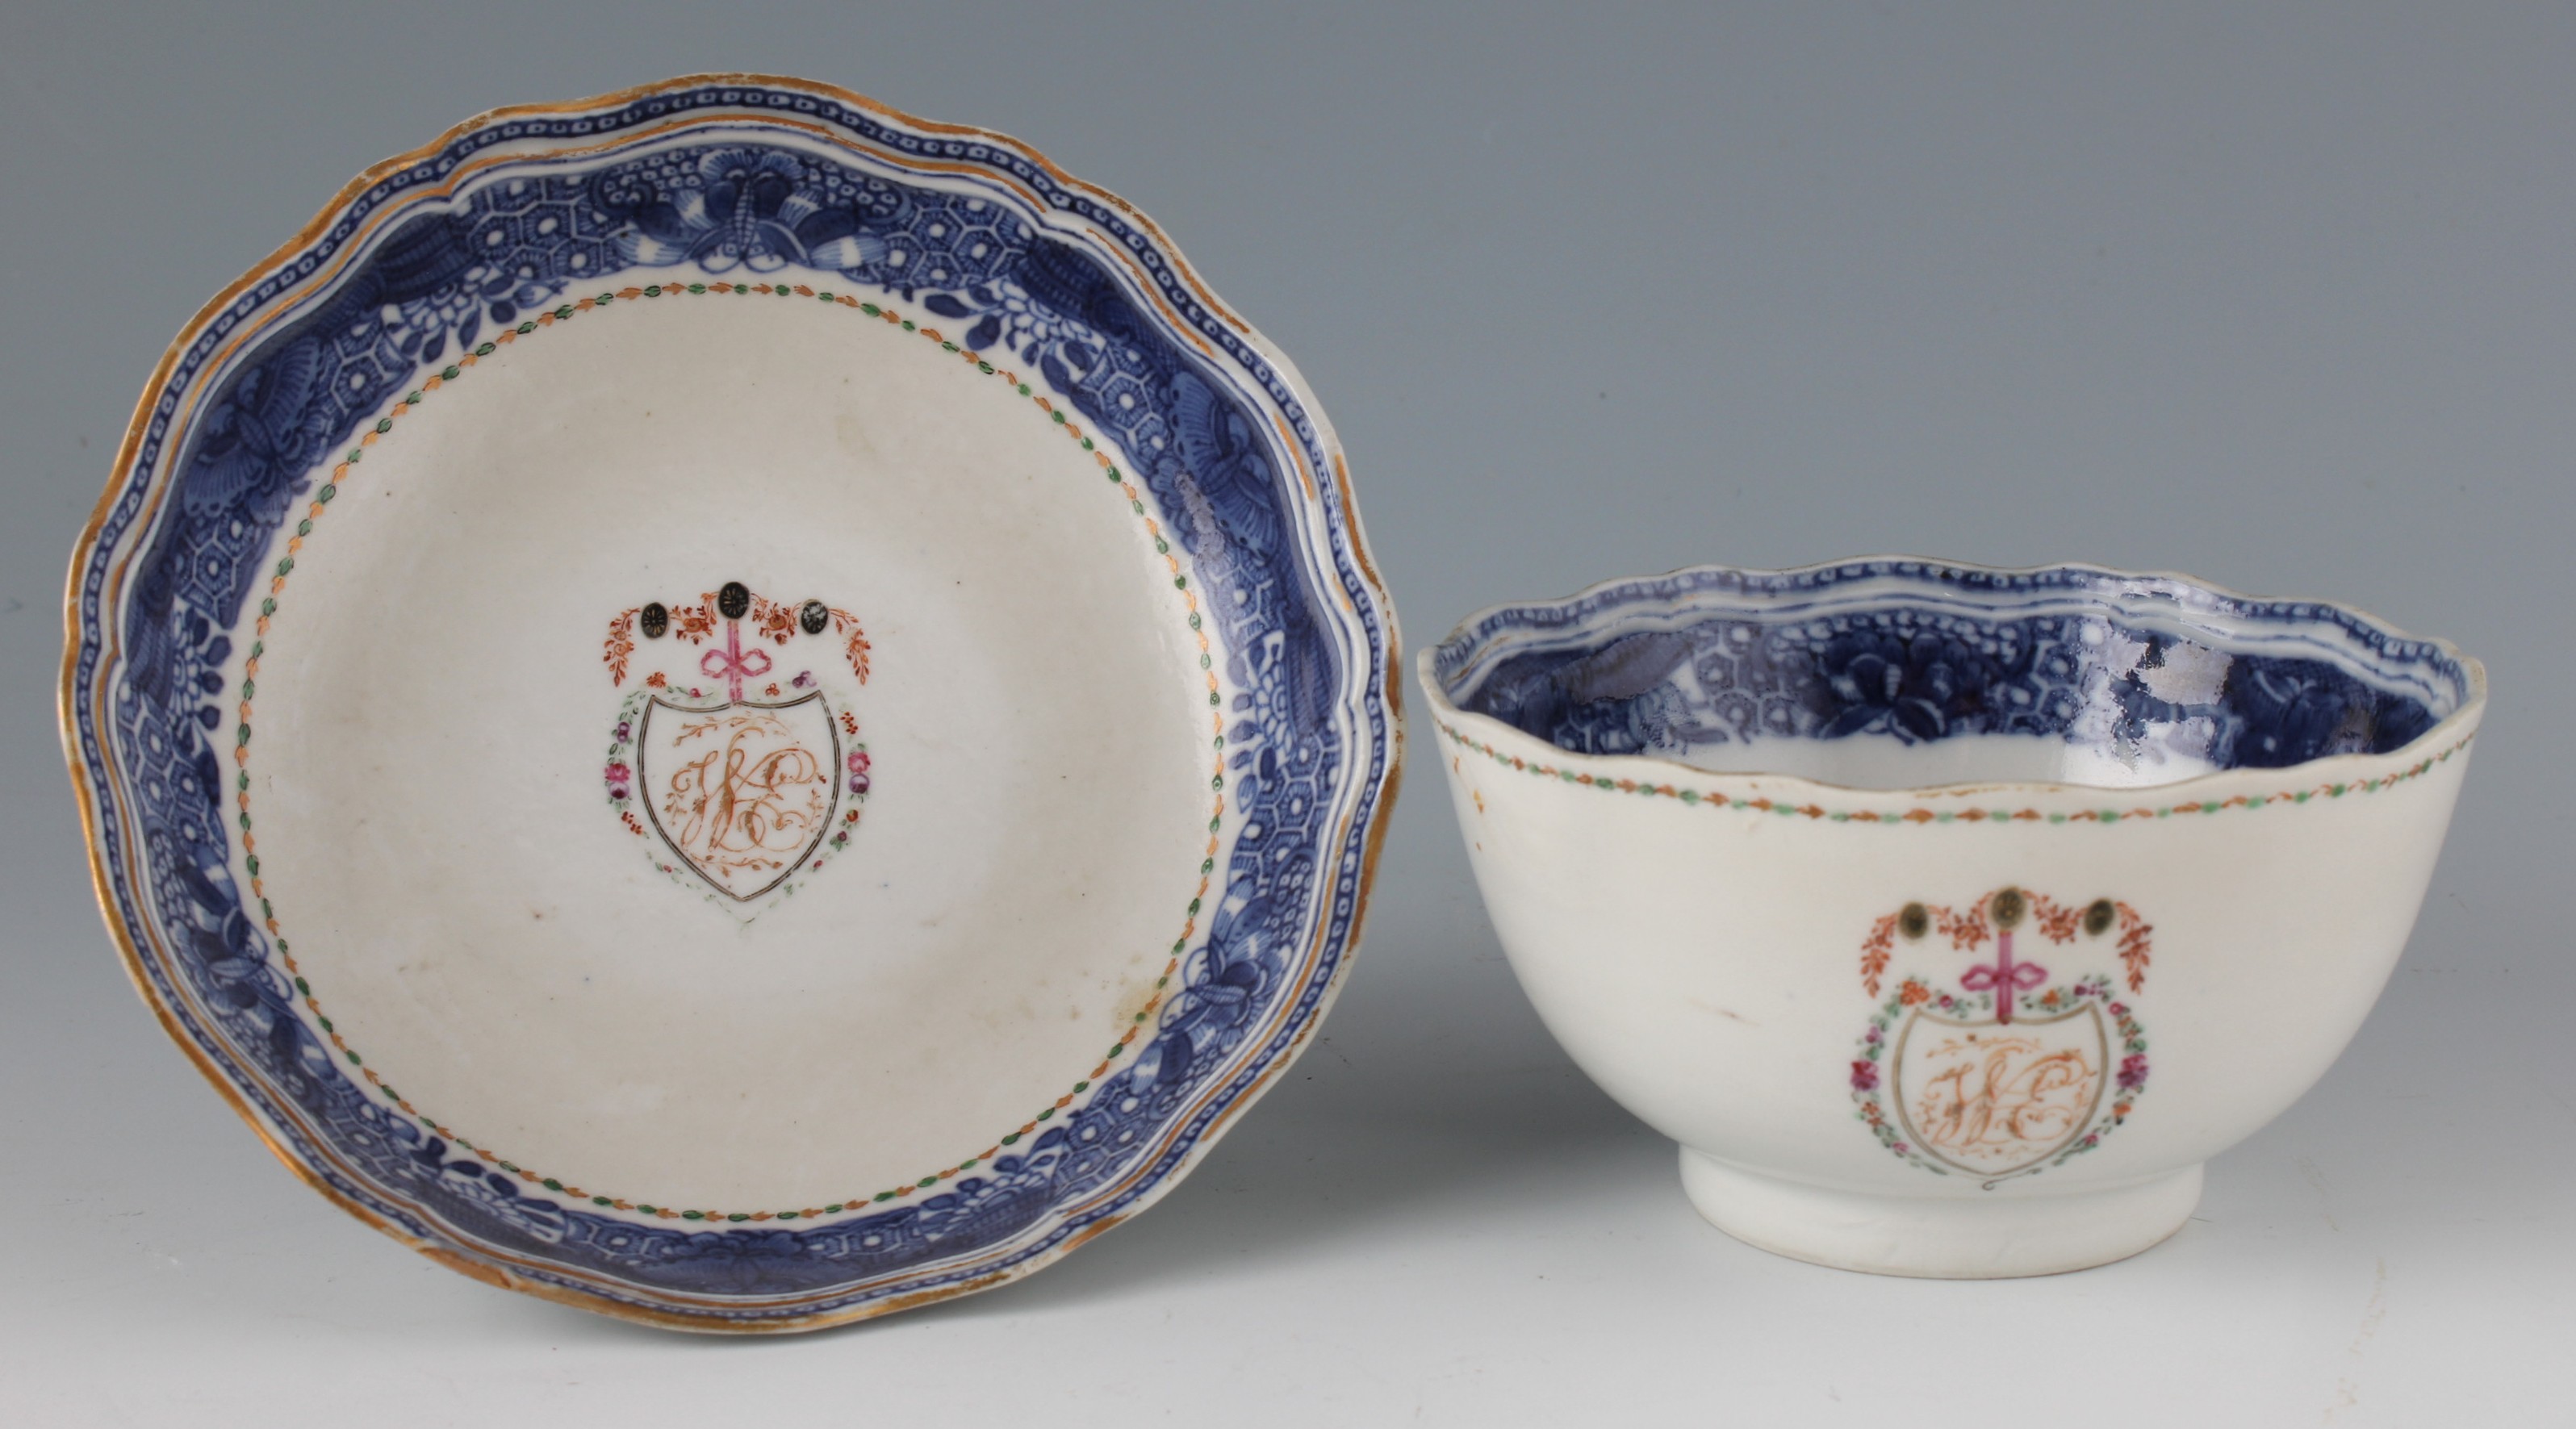 An 18th Century Chinese porcelain armorial tea bowl and saucer, each with gilt scalloped edge and